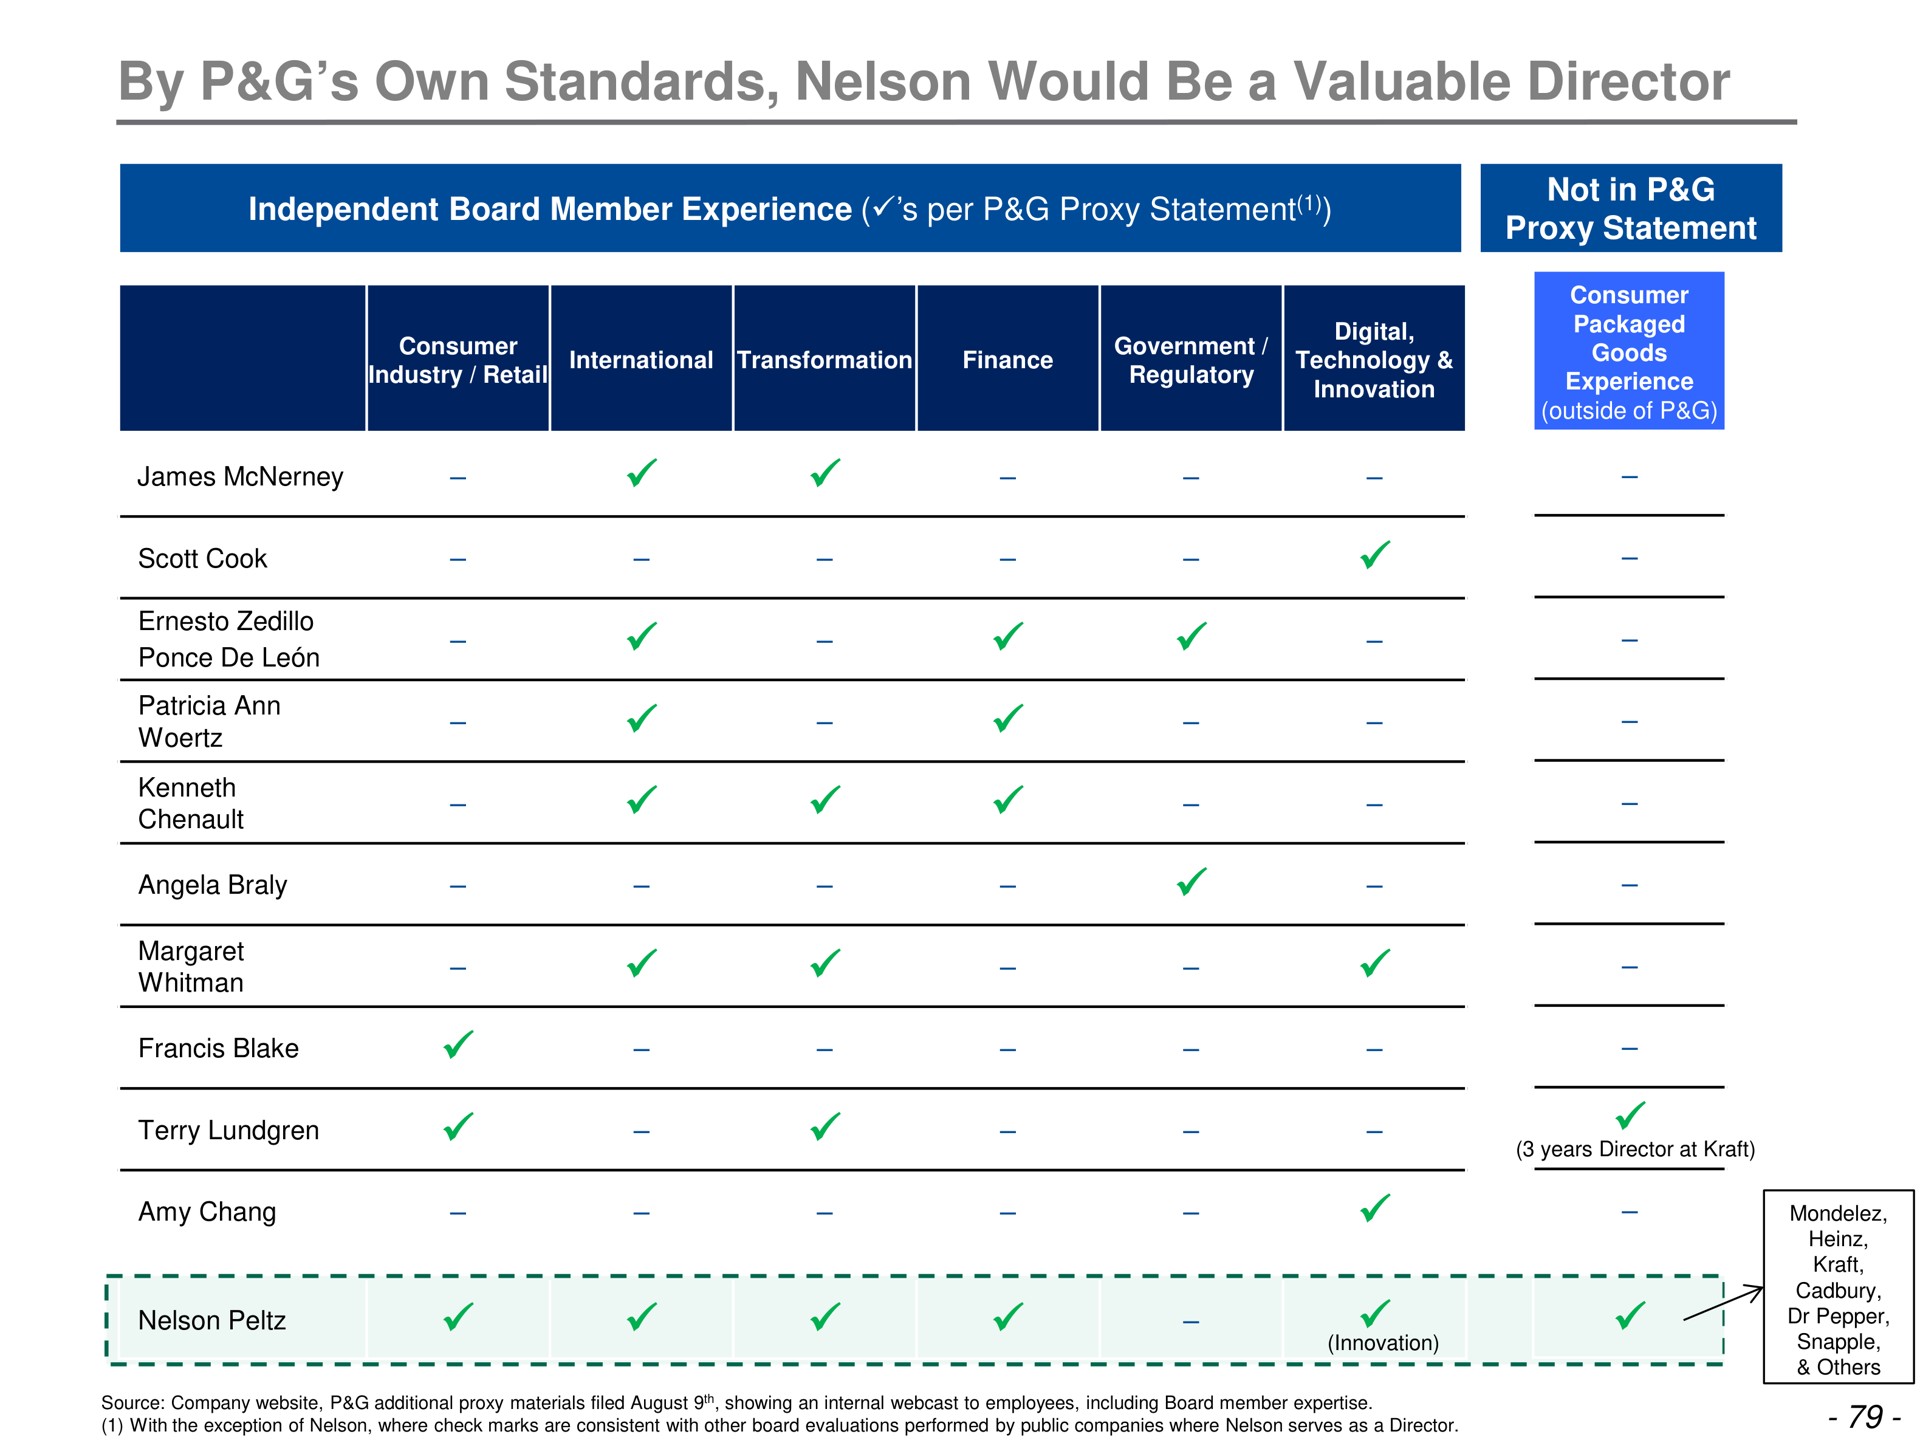 by own standards nelson would be a valuable director | Trian Partners